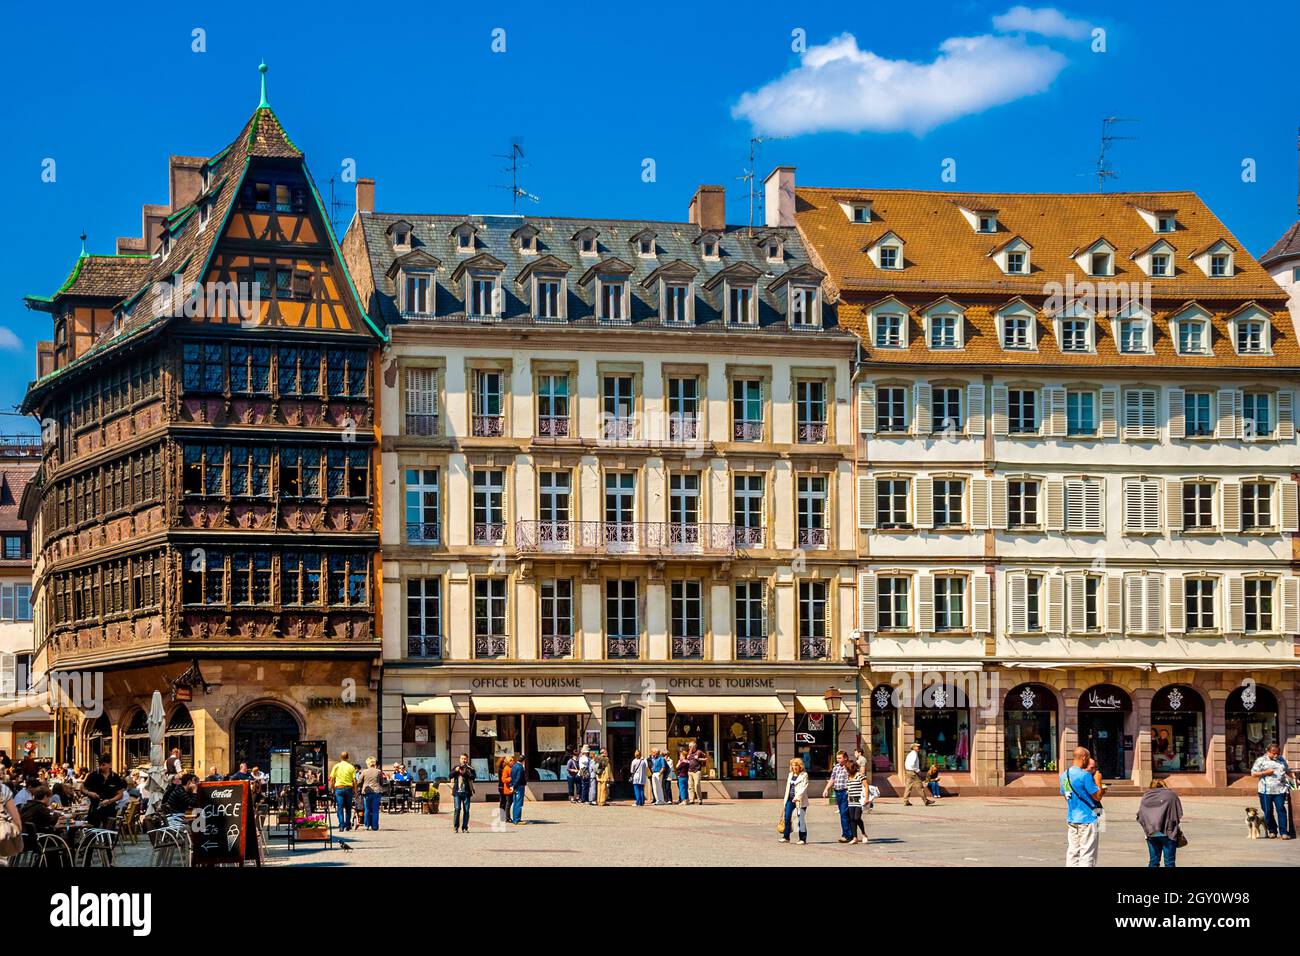 Nice view of a row of buildings on the Place de la Cathédrale in Strasbourg including the famous Kammerzell House, one of the most ornate and well... Stock Photo